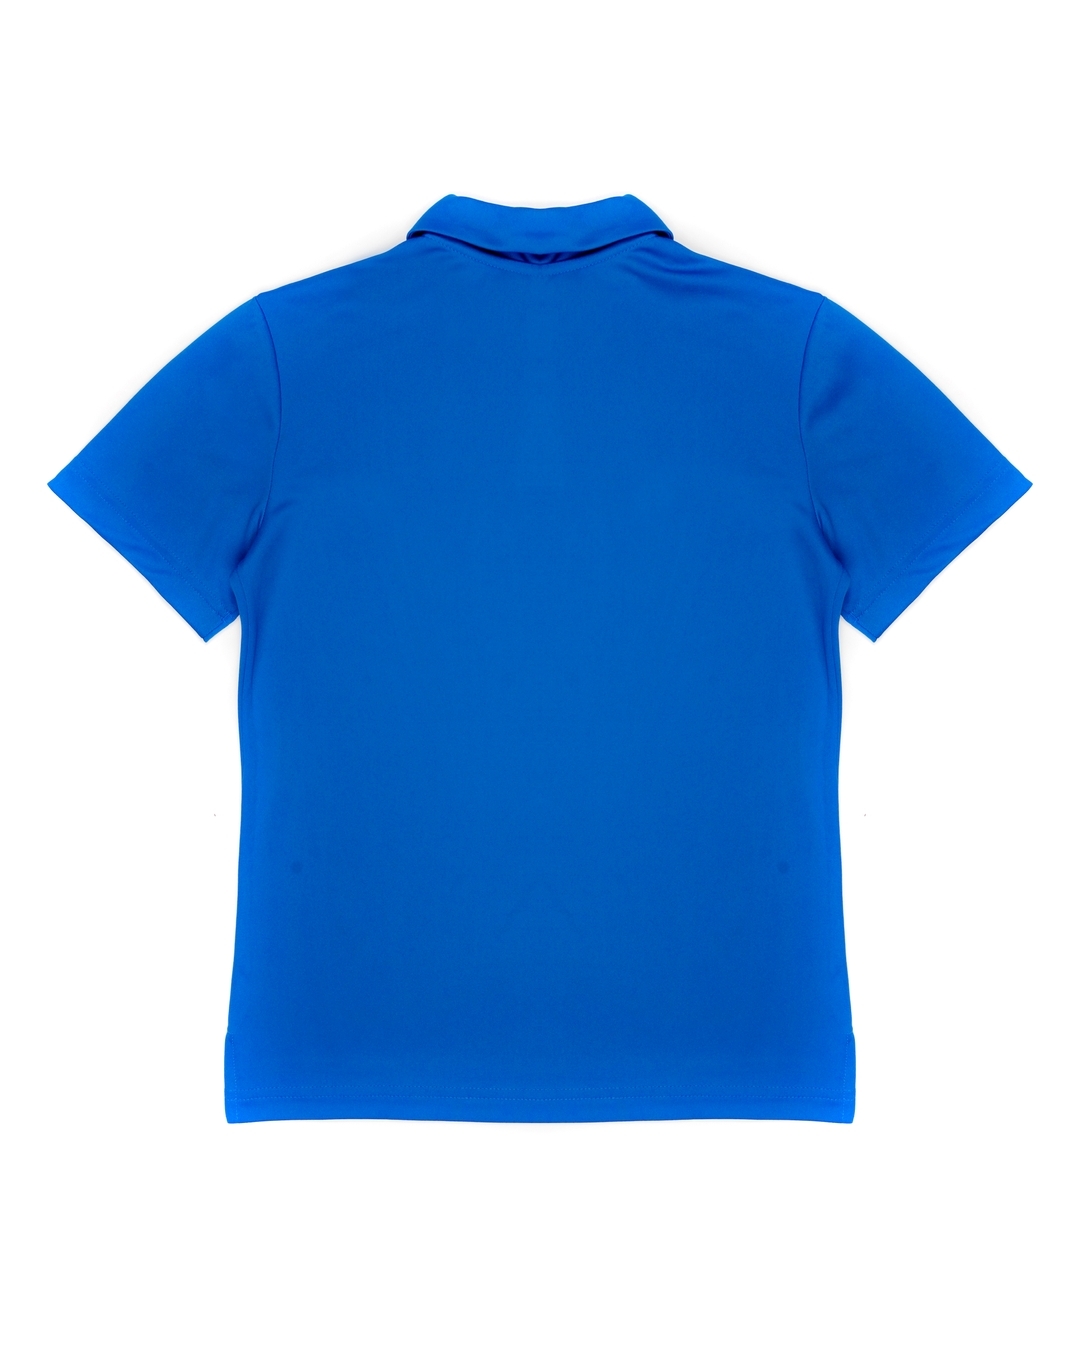 Buy Boys short sleeves t-shirts Blue at Best Price